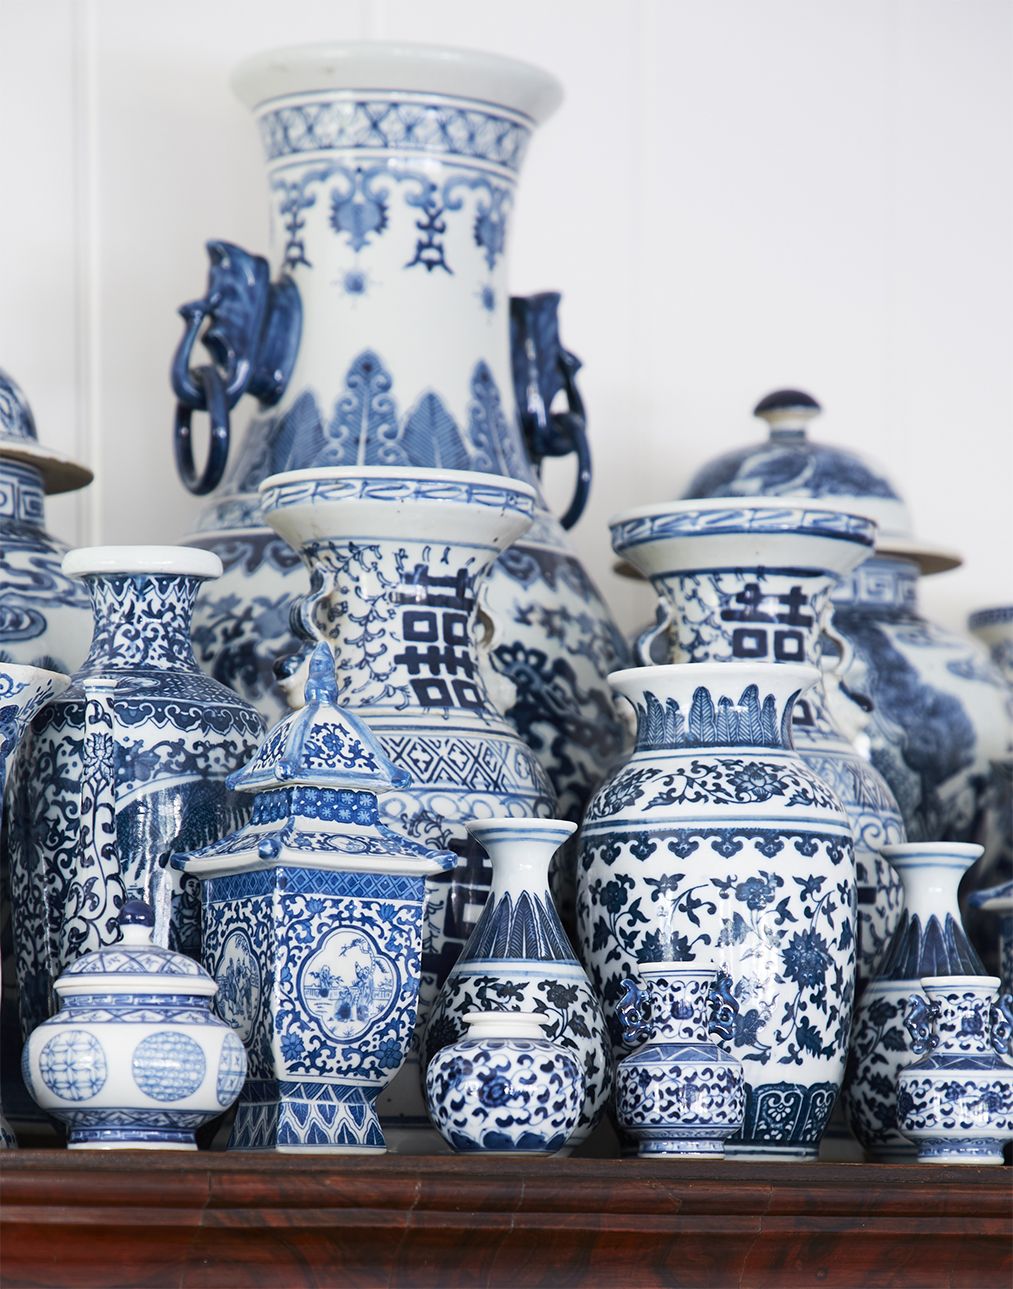 What to Look for When Shopping for Blue and White Porcelain